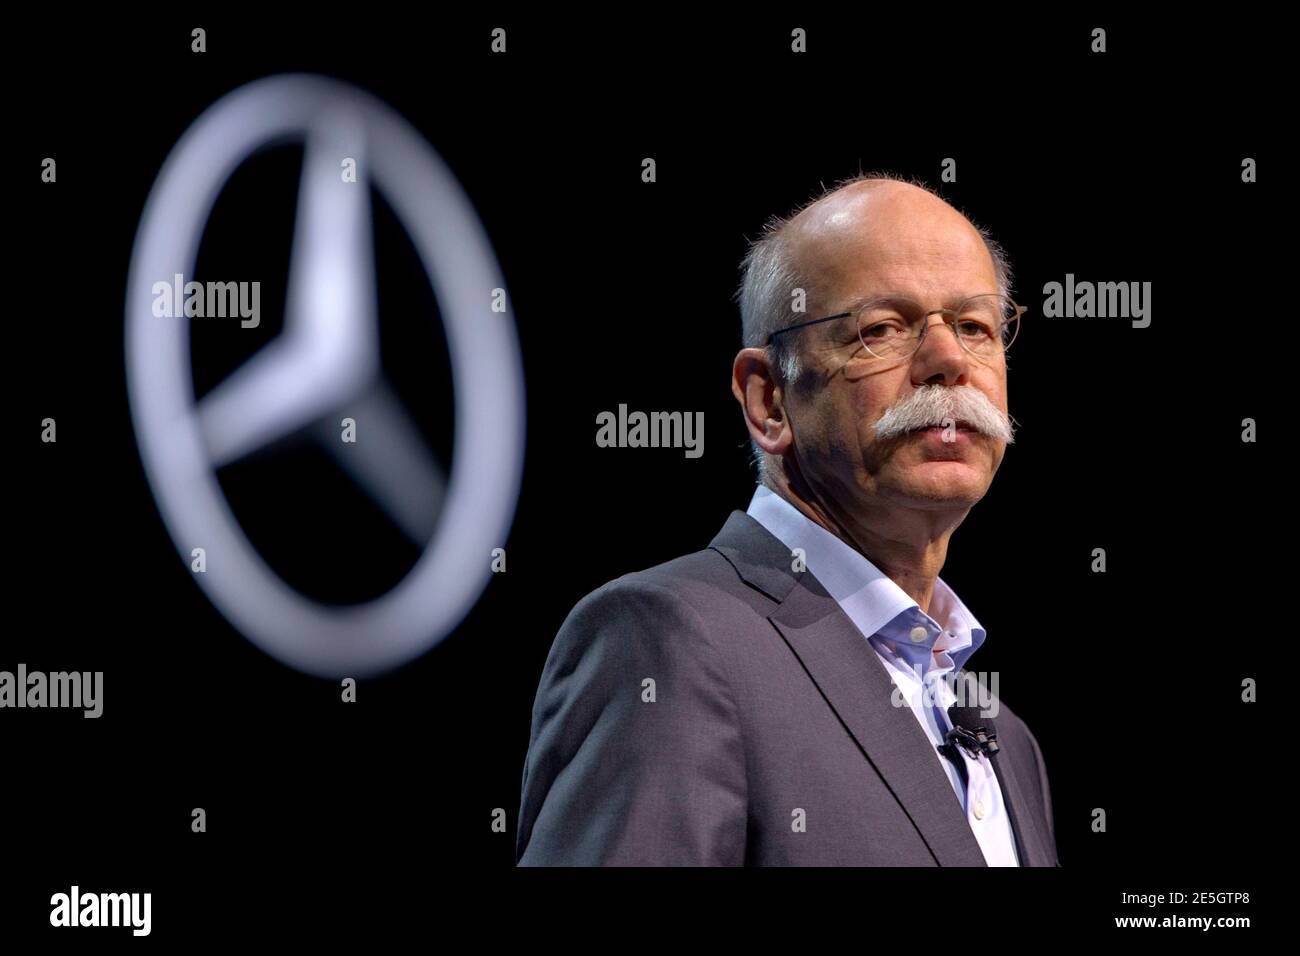 Dieter Zetsche, head of Mercedes-Benz cars, looks on during the 2015 International Consumer Electronics Show (CES) in Las Vegas, Nevada January 5, 2015. Germany's Daimler AG wants to reset consumers' expectations about self-driving cars with its futuristic Mercedes-Benz F 015 concept, unveiled Monday evening at the annual Consumer Electronics Show in Las Vegas. REUTERS/Steve Marcus (UNITED STATES - Tags: SCIENCE TECHNOLOGY BUSINESS TRANSPORT) Stock Photo